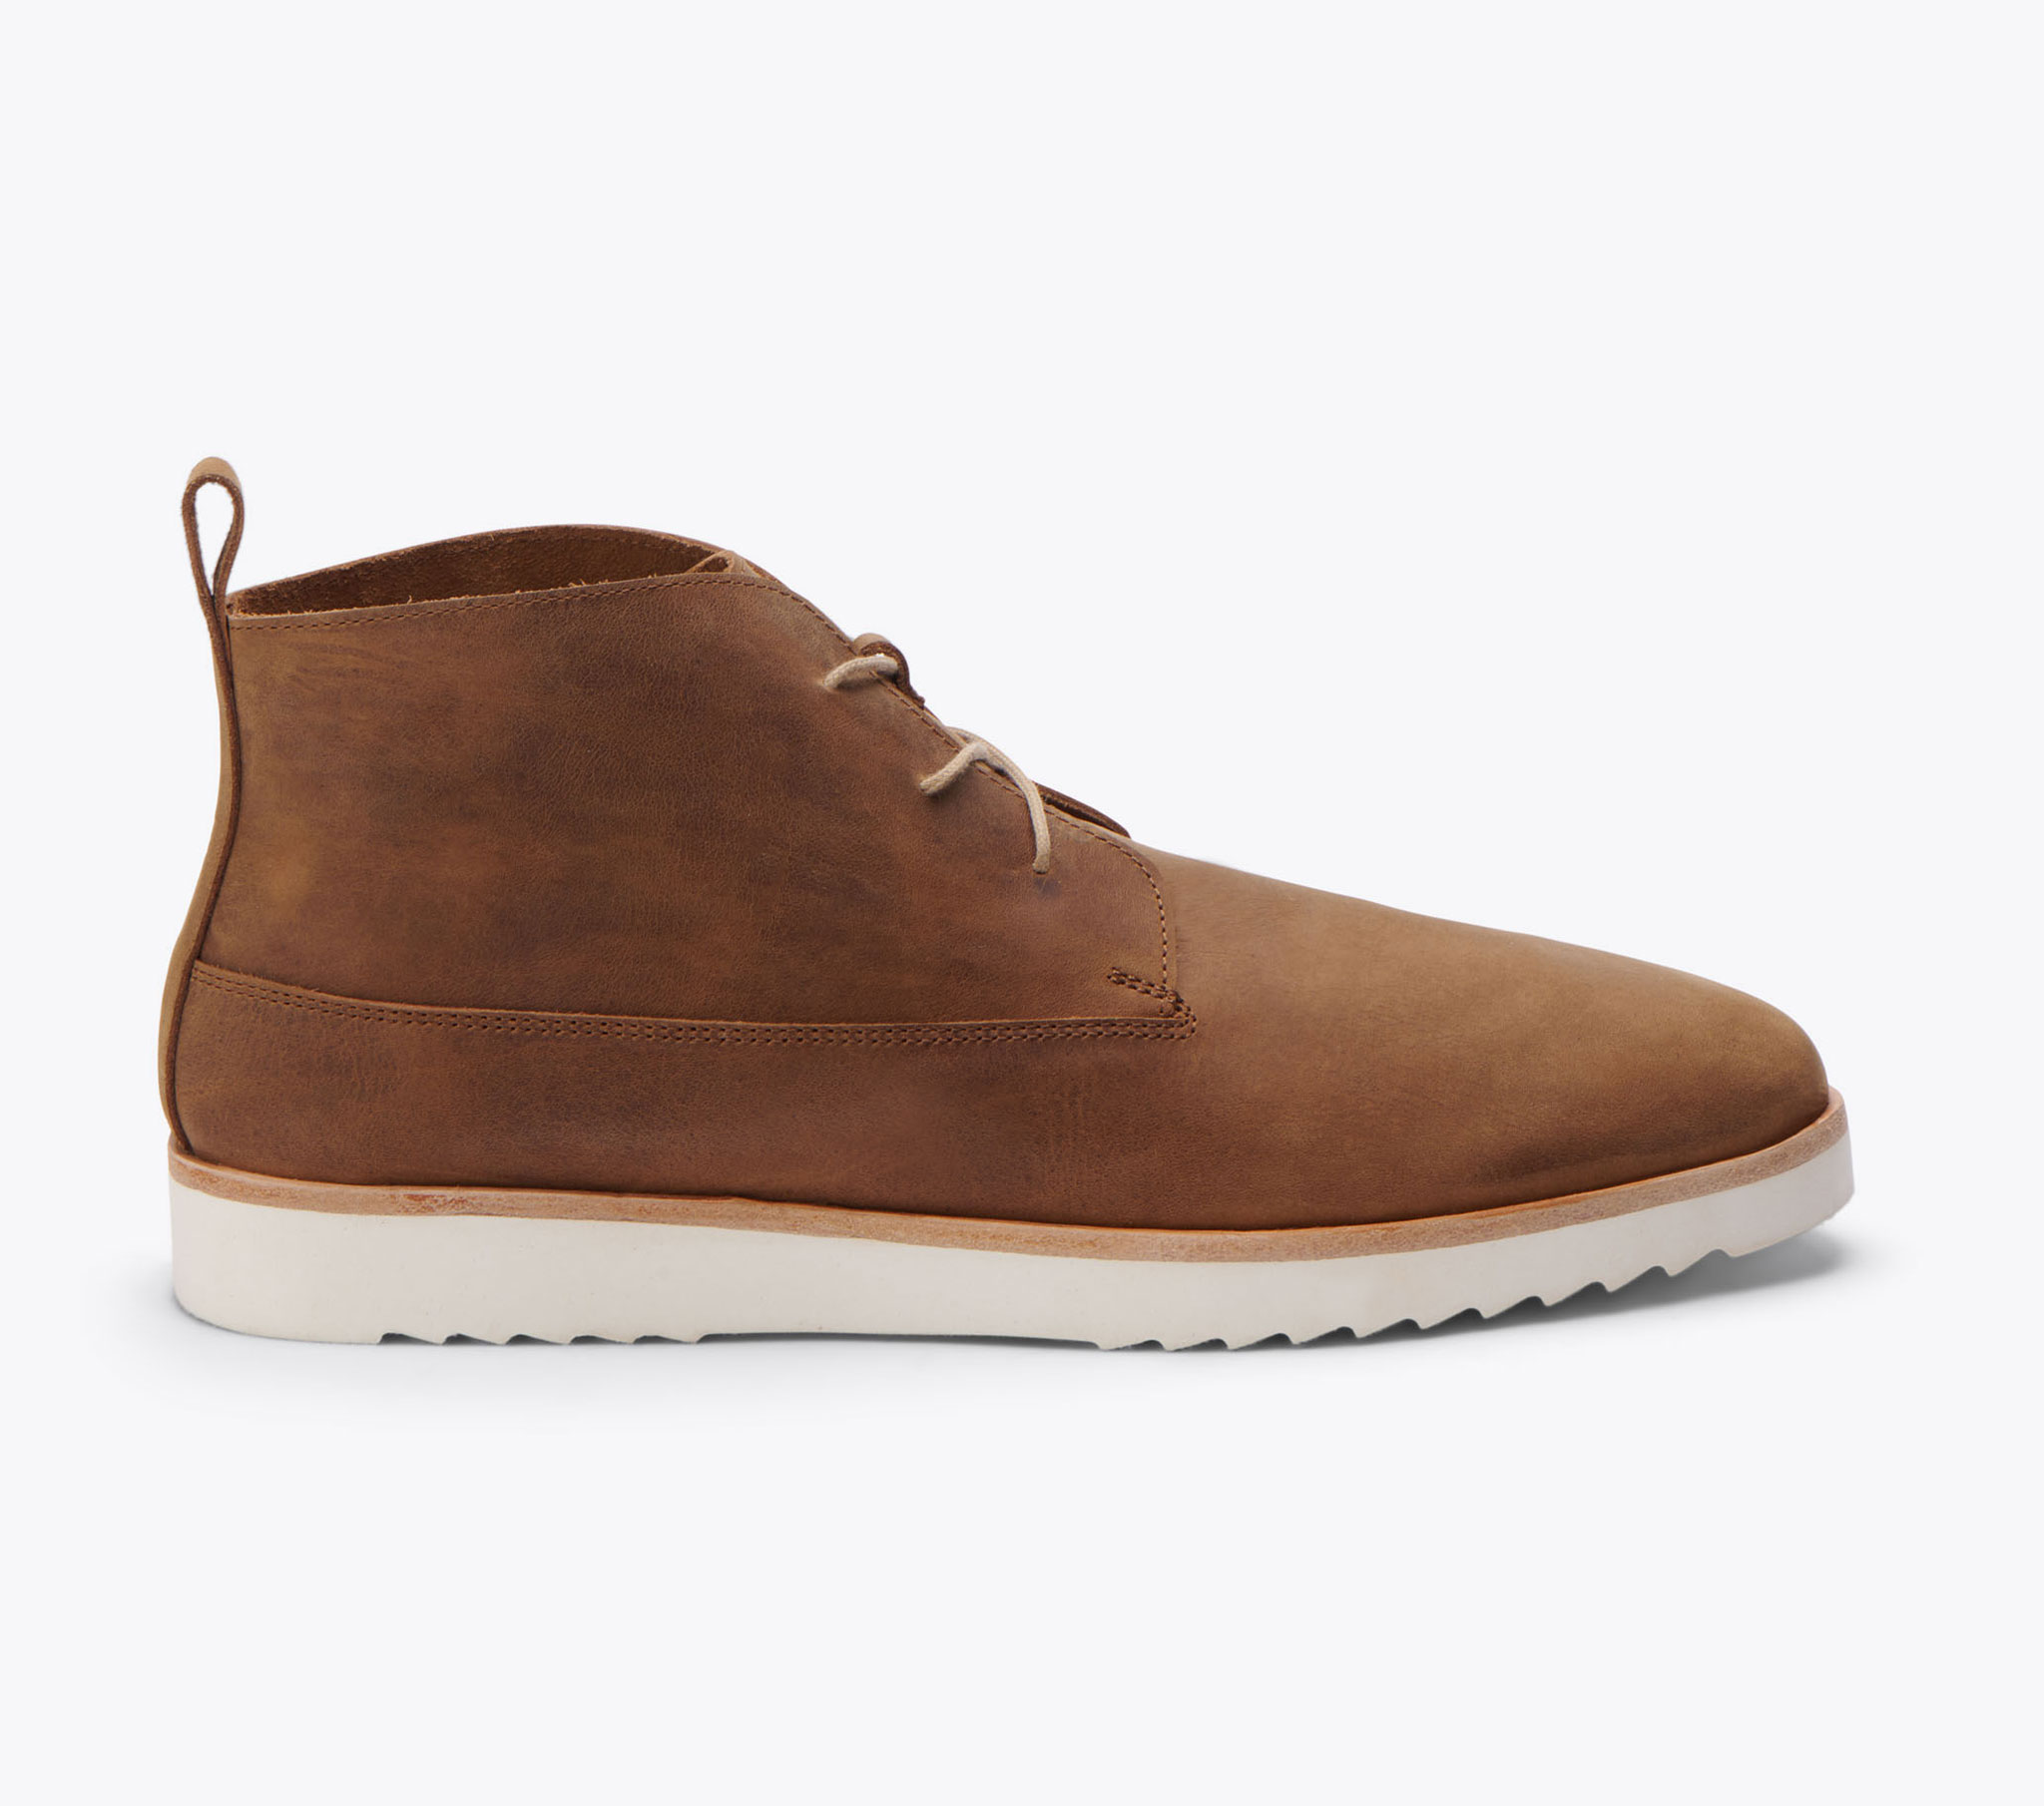 Nisolo Cusco Flex Chukka Tobacco - Every Nisolo product is built on the foundation of comfort, function, and design. 